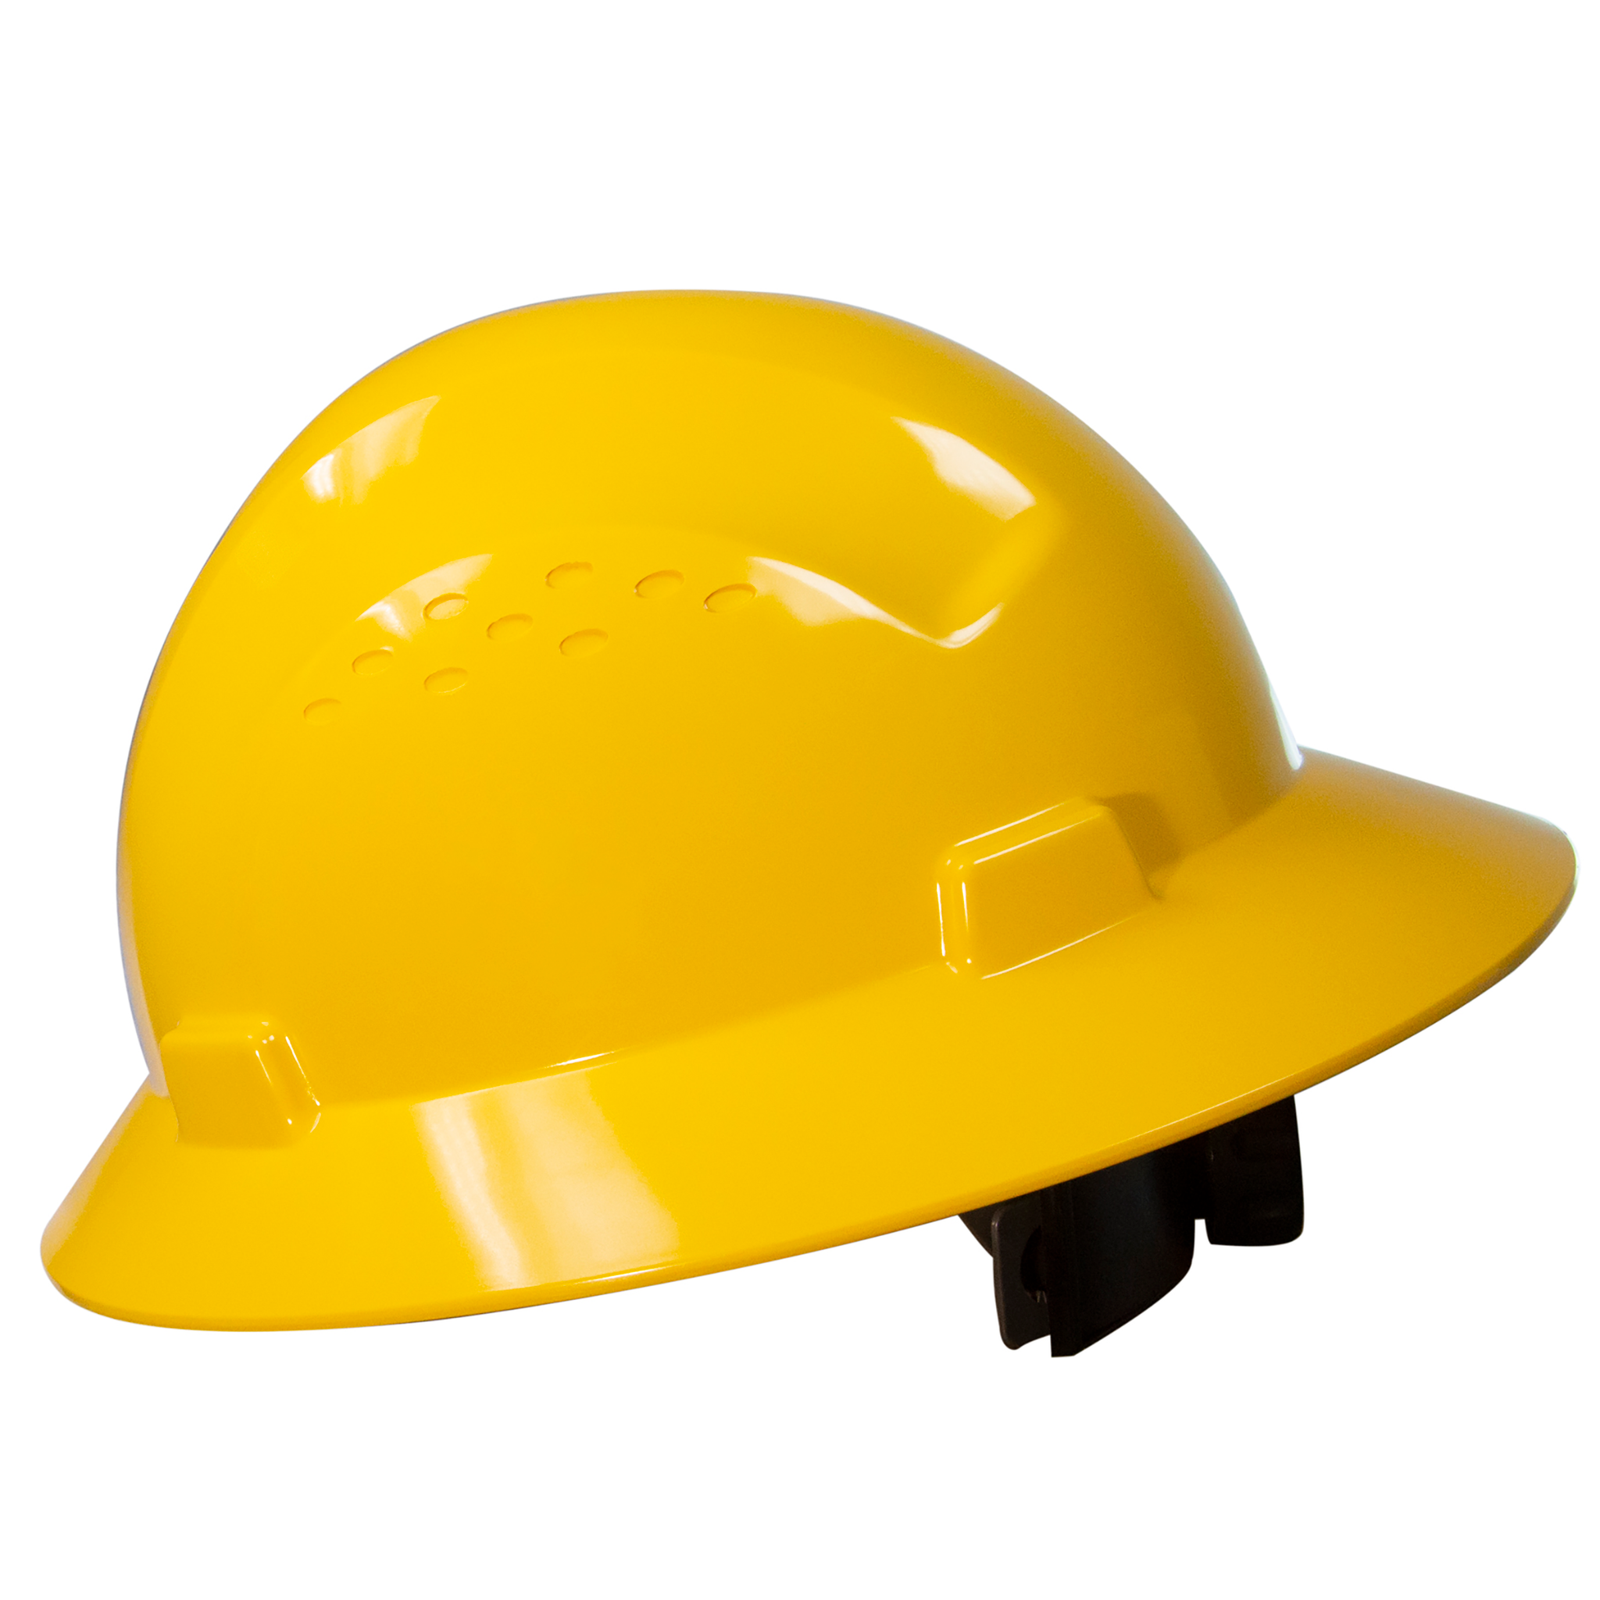 A JORESTECH full brim yellow safety hard hat with 4 point suspension Type I Class C, E, G